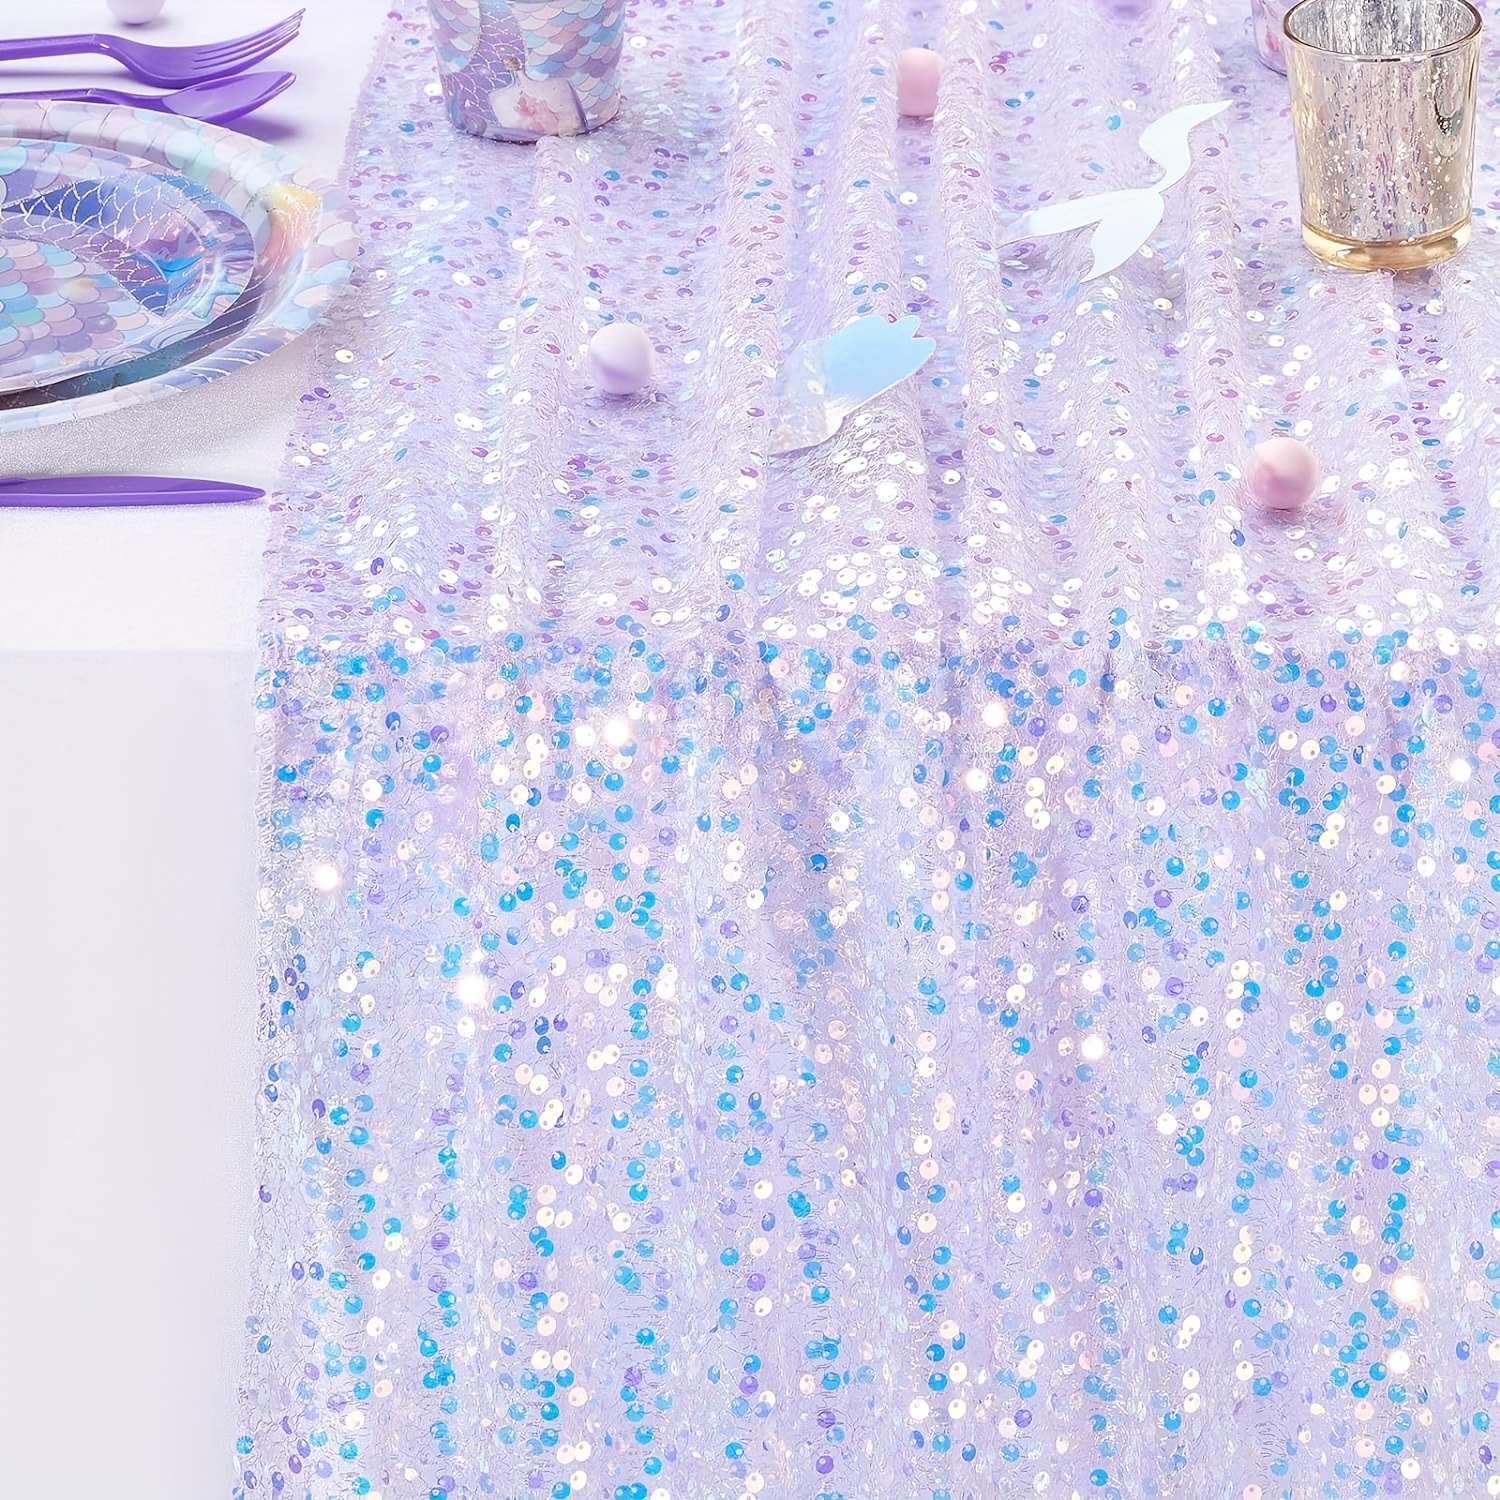 

Mermaid Party Table Runner - Rectangle Polyester Woven Table Cloth With Sparkling Holographic Mermaid Tail Sequin Design For Birthday, Pool, Underwater Ocean Themed Party Decorations